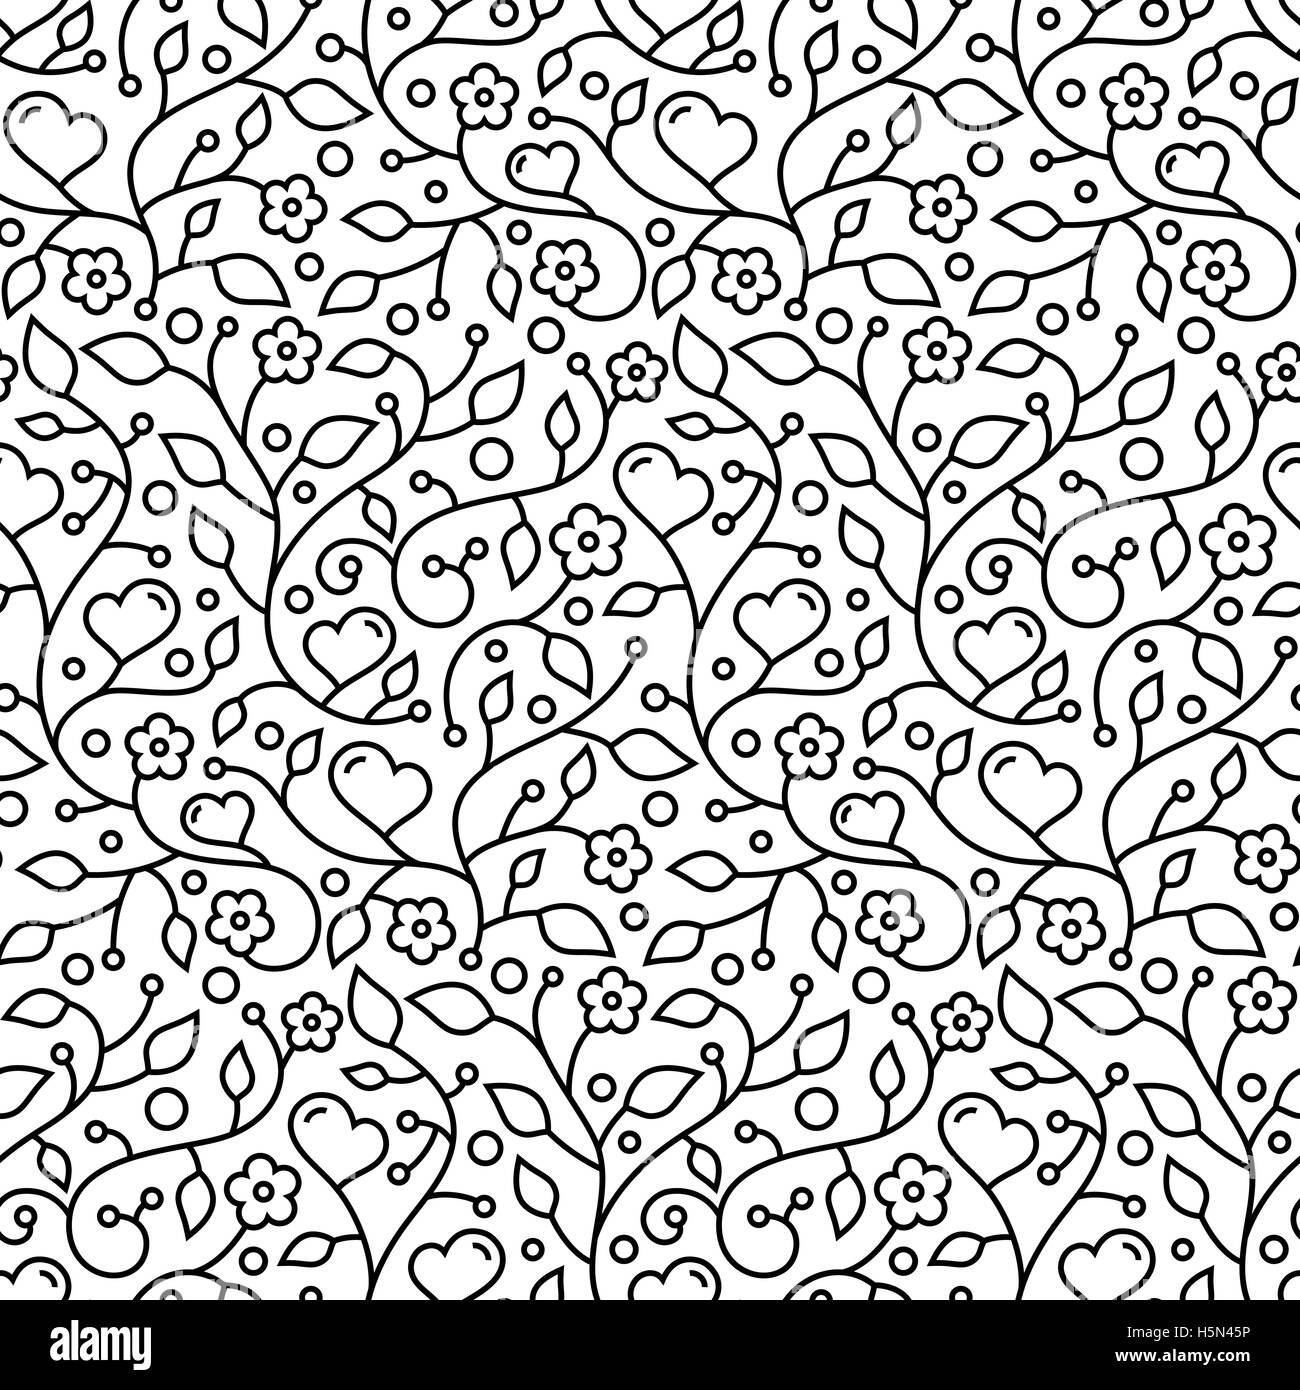 Ornamental floral seamless wallpaper pattern with flowers, leaves and hearts for your design Stock Vector